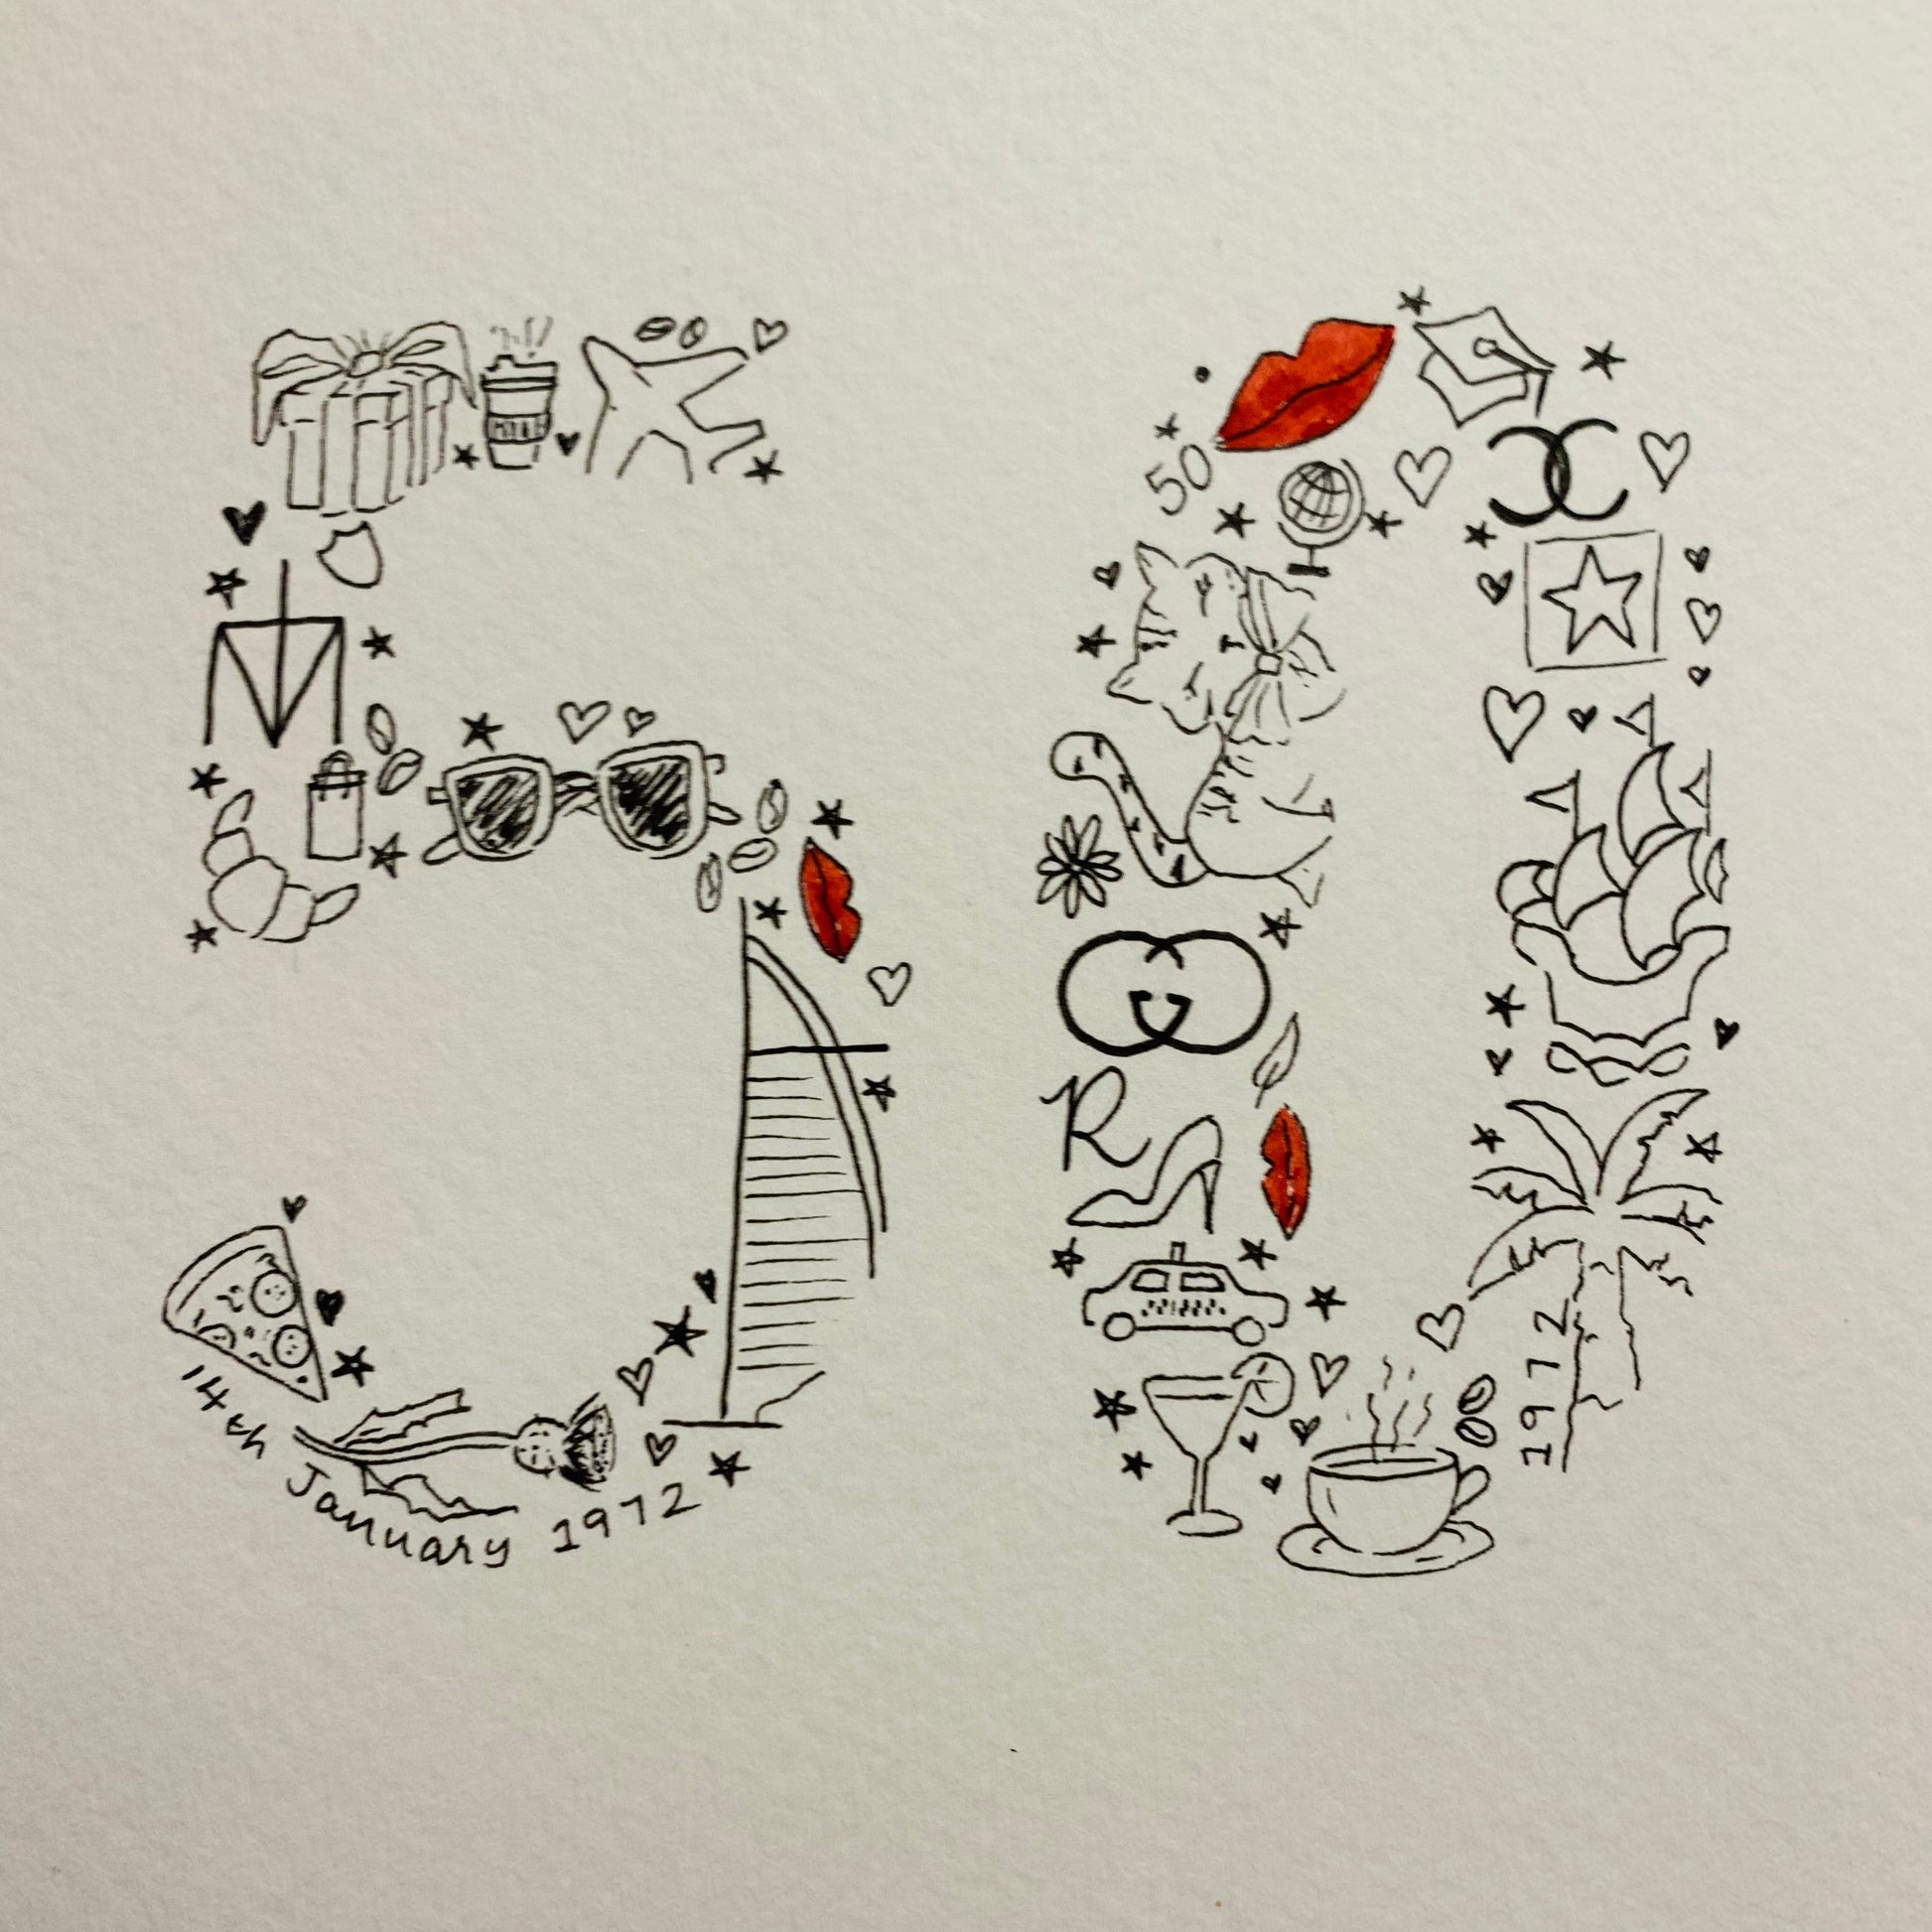 drawings making up numbers 5 and 0 black and white with bright red lips dotted through Dubai, New York, Tiffany, blue Peter, cat, birthday, anniversary